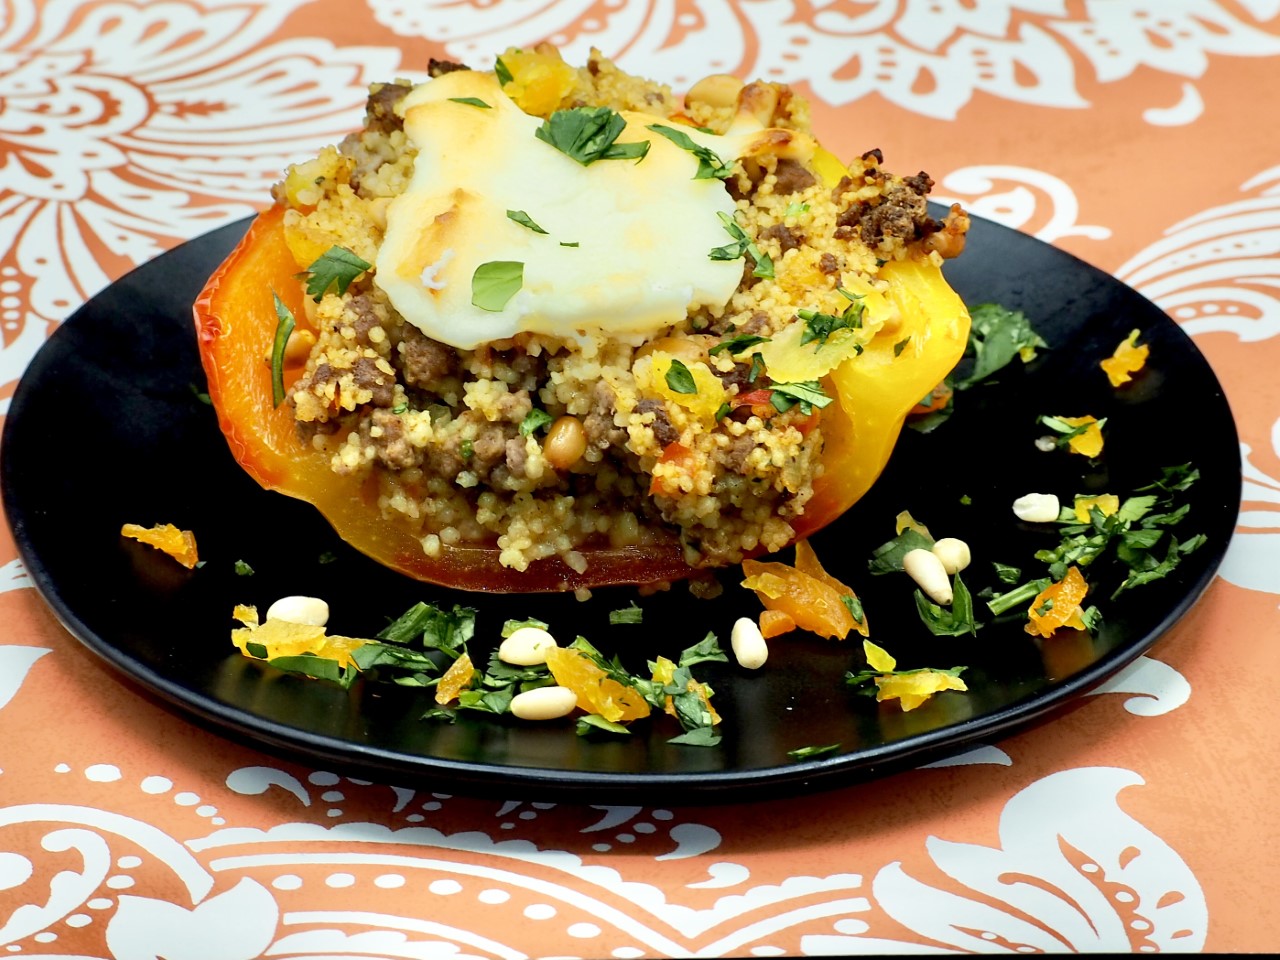 Tajine-Style Beef and Couscous Stuffed Peppers